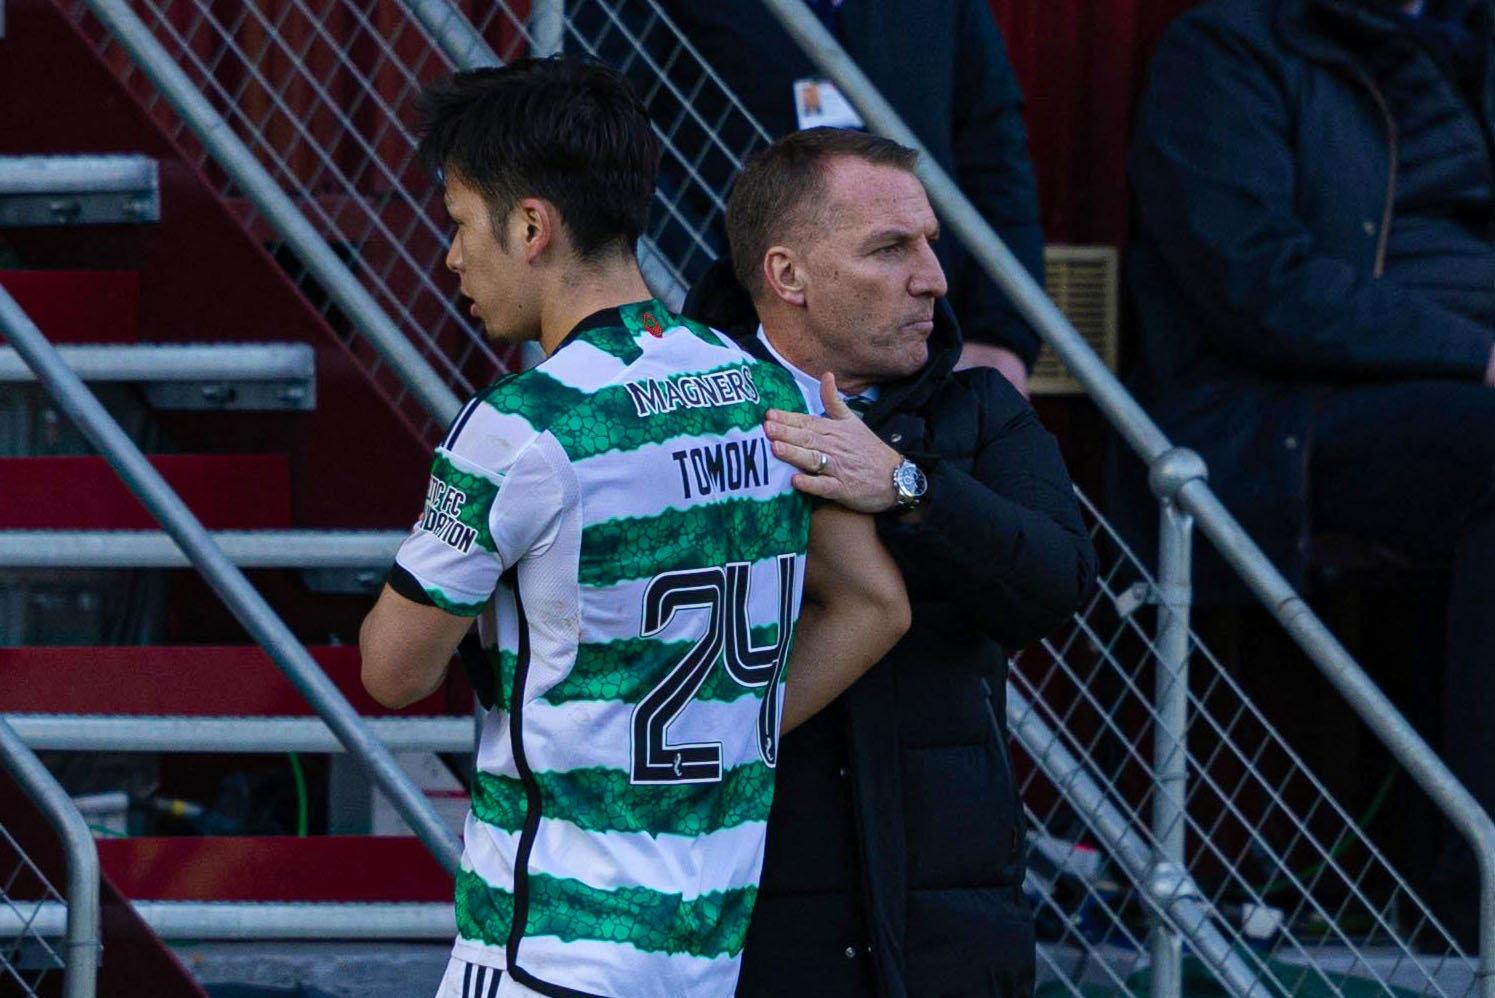 brendan rodgers addresses celtic fans booing his substitution at motherwell - 'that seemed strange'